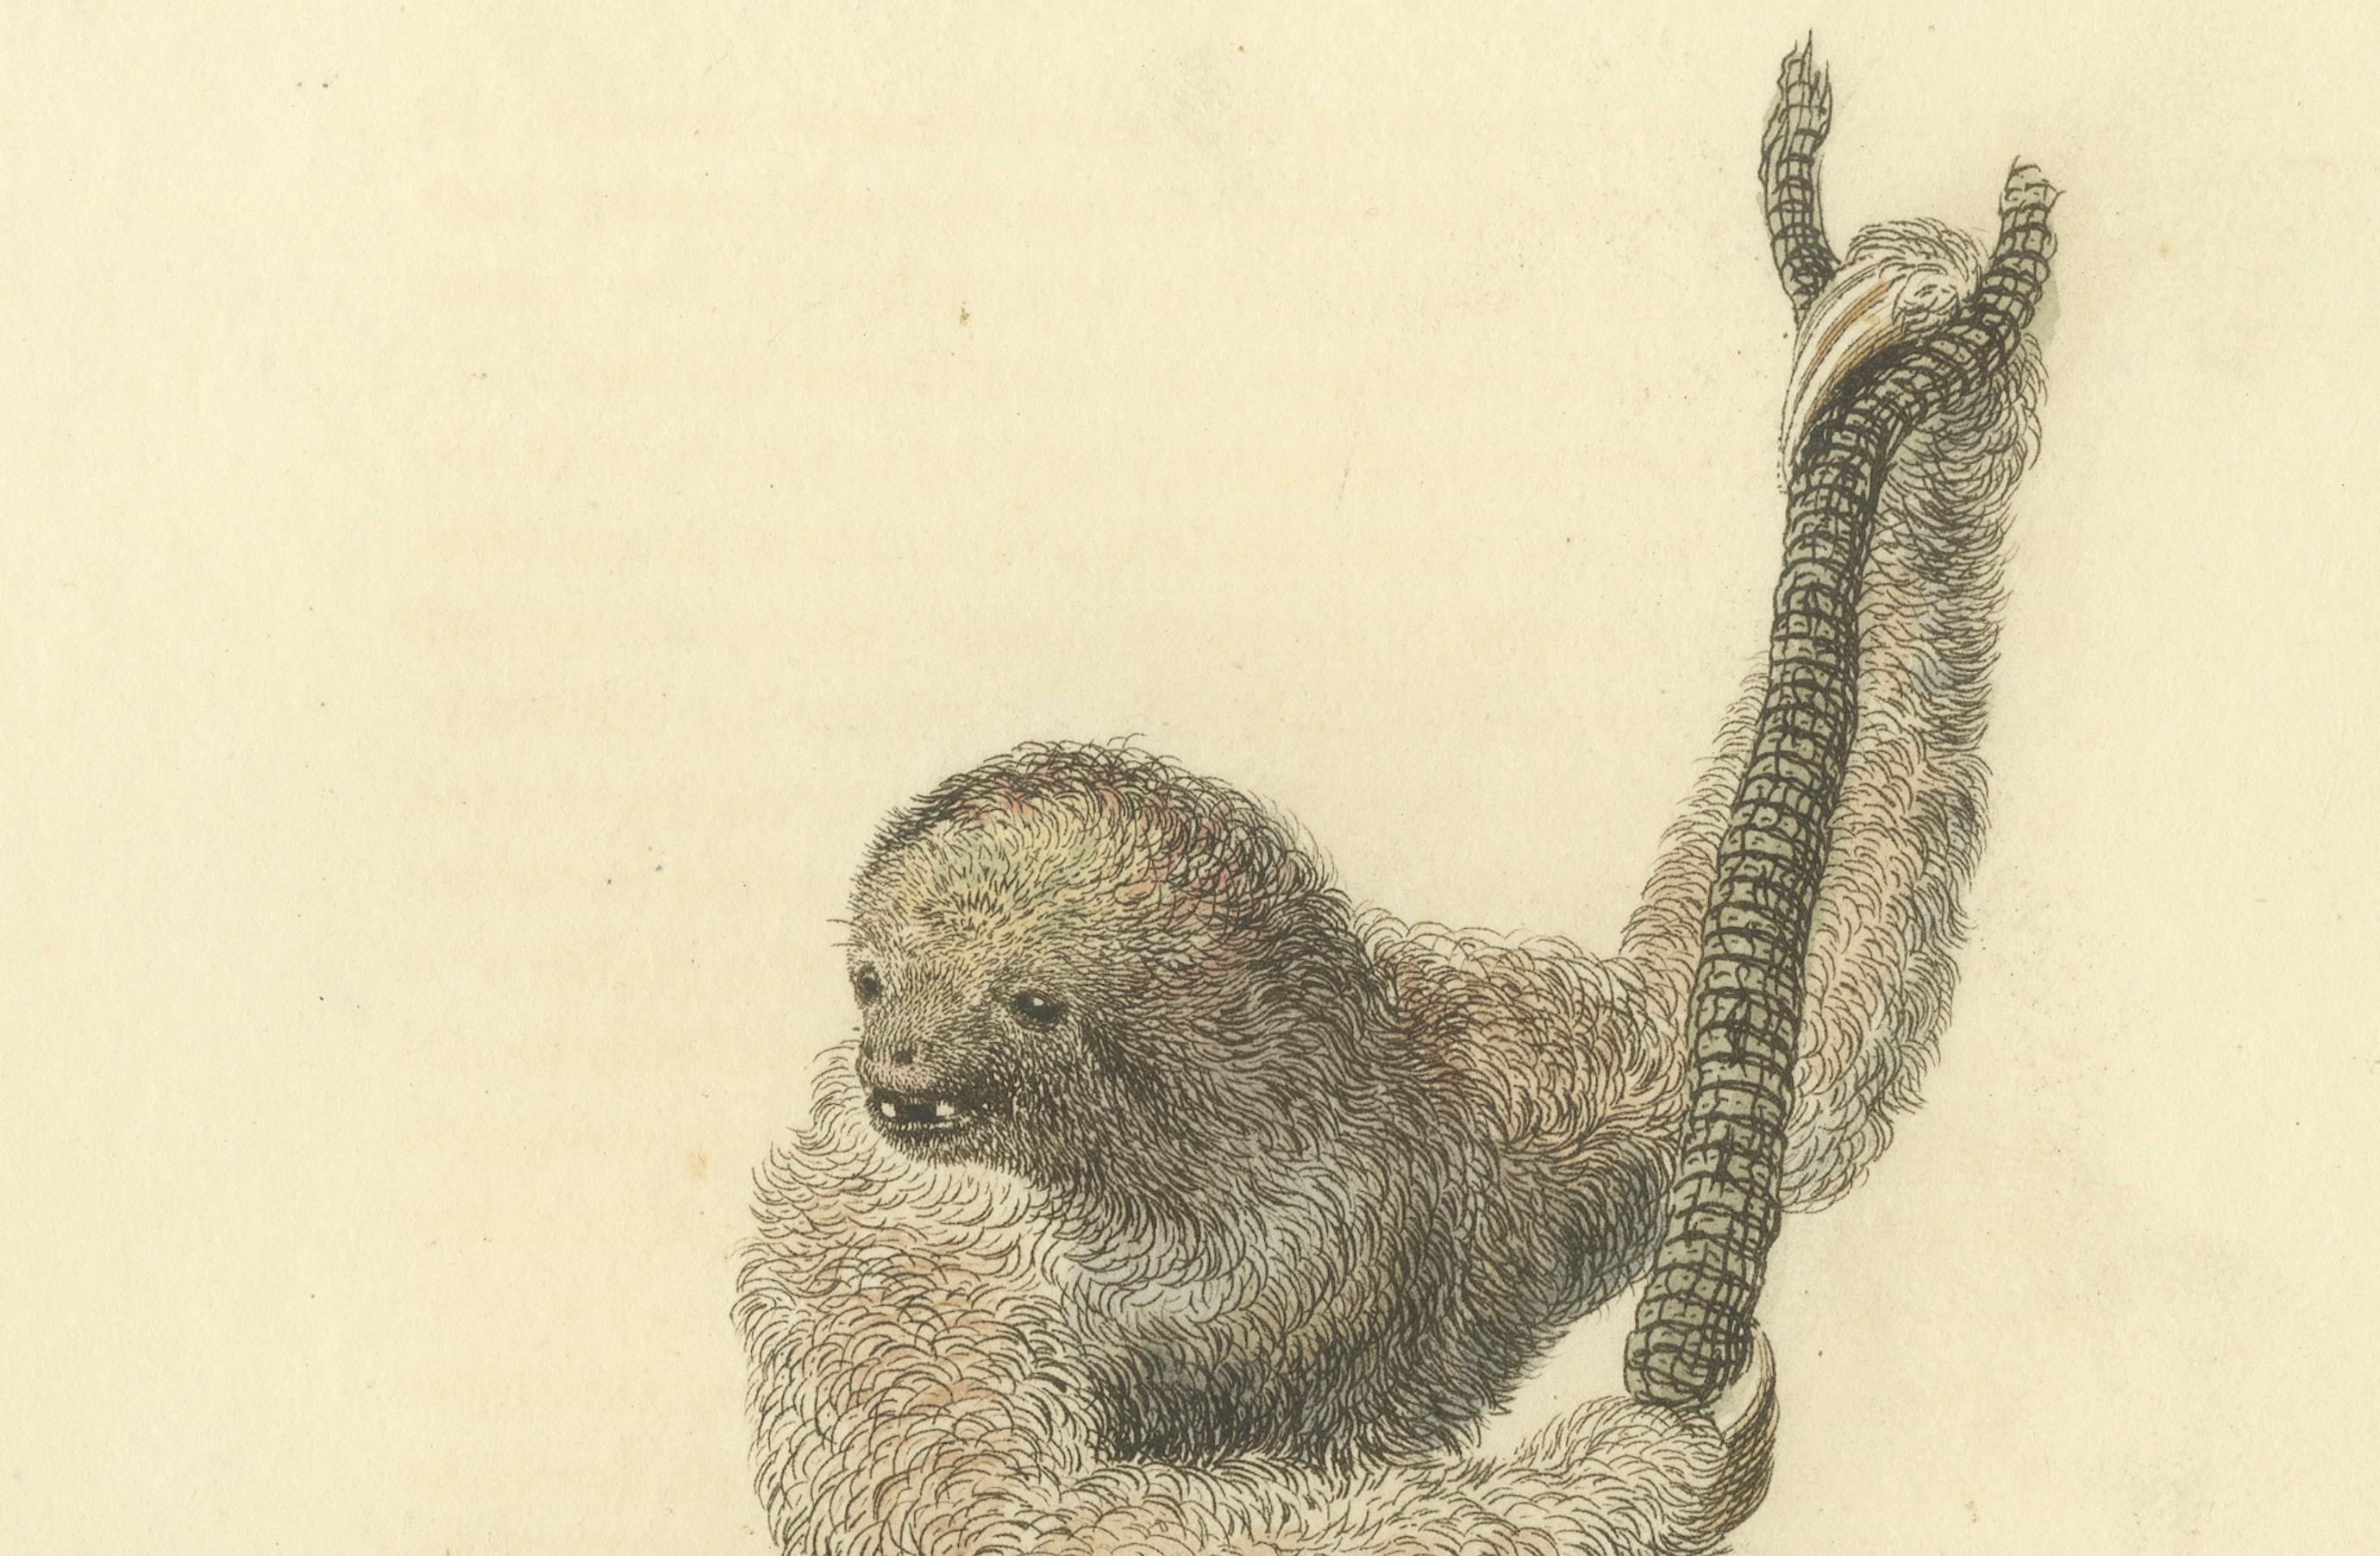 The image  is described as an antique print titled 'Three Toe'd Sloth Var., Bradypus Tridactylus'. This print was published by G.B. Whittaker following an illustration by Charles Hamilton Smith around 1825. It depicts the pale-throated sloth,